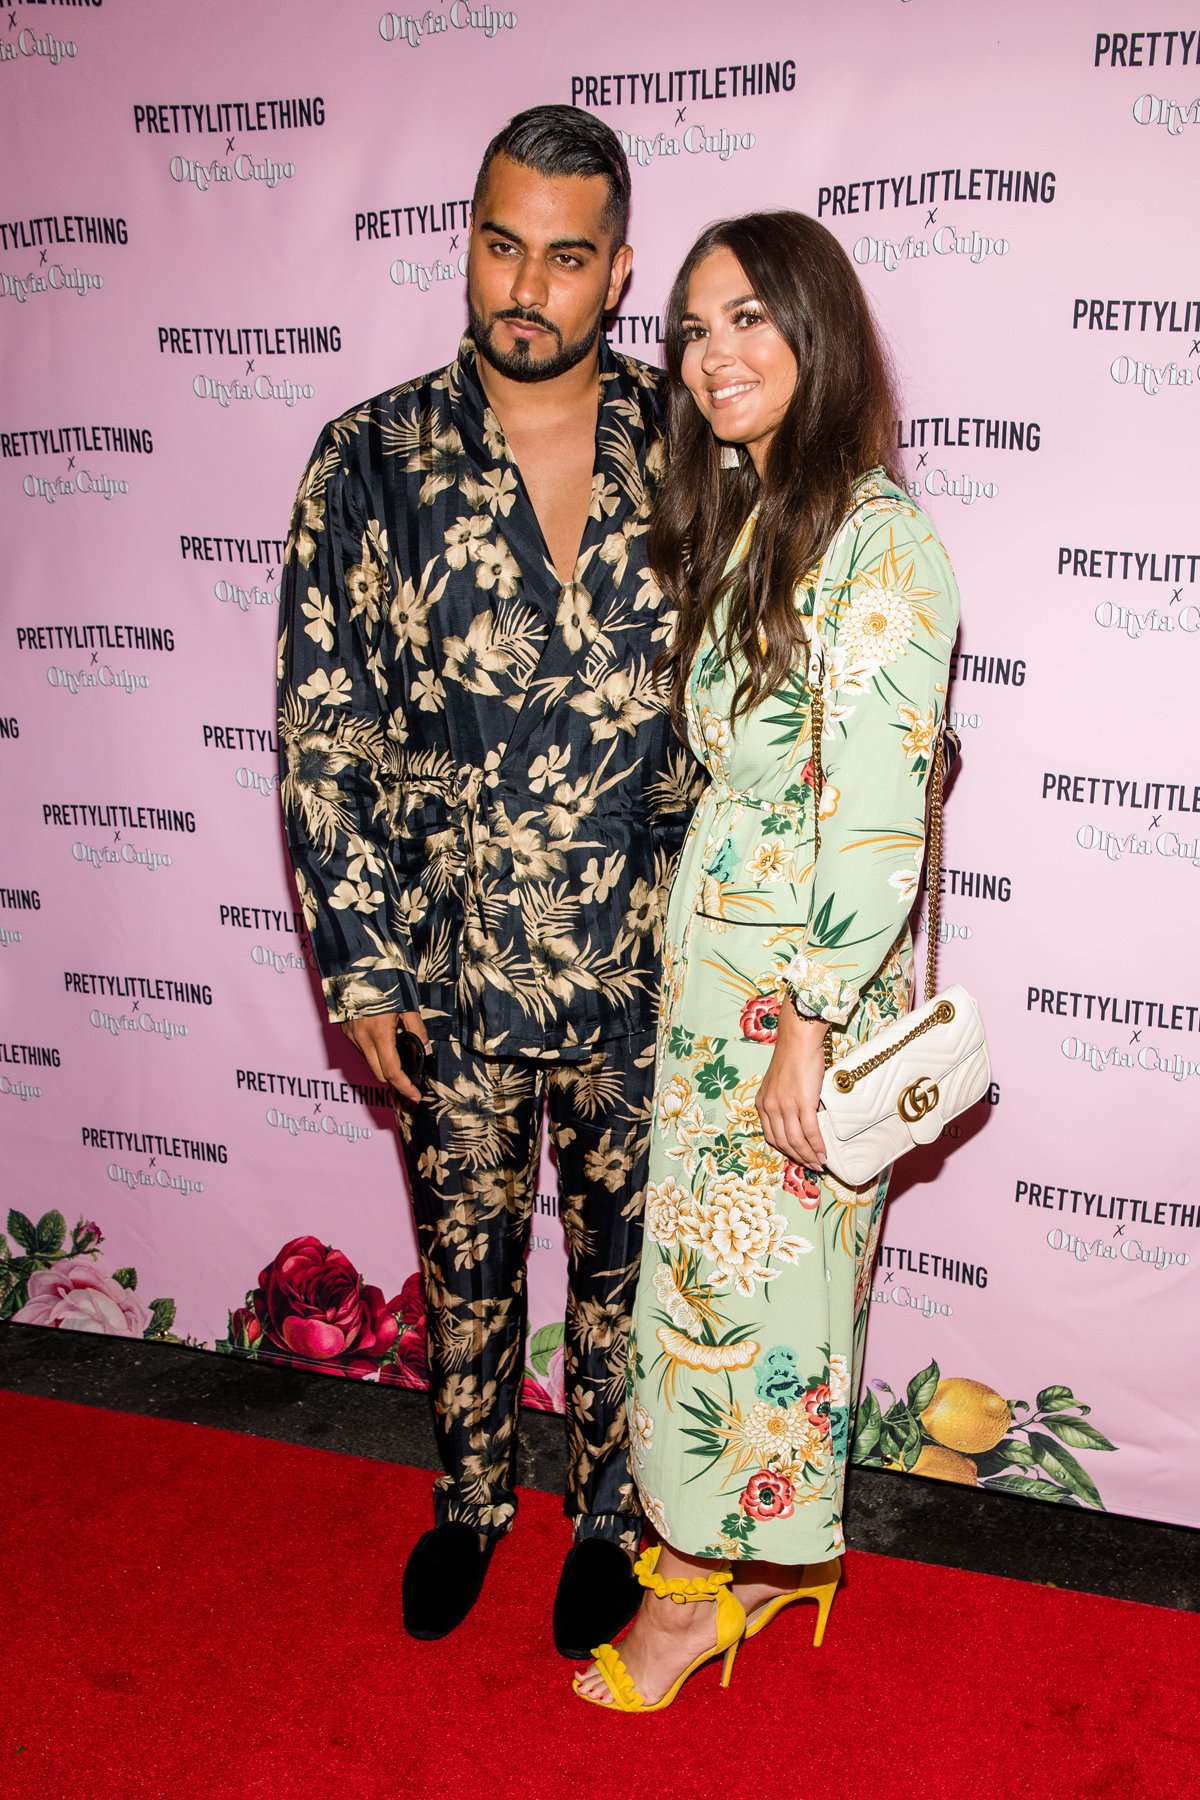 PrettyLittleThing PLT X Olivia Culpo Collection  Celebrity Launch Party Umar Kamani and Amy Radish.jpg